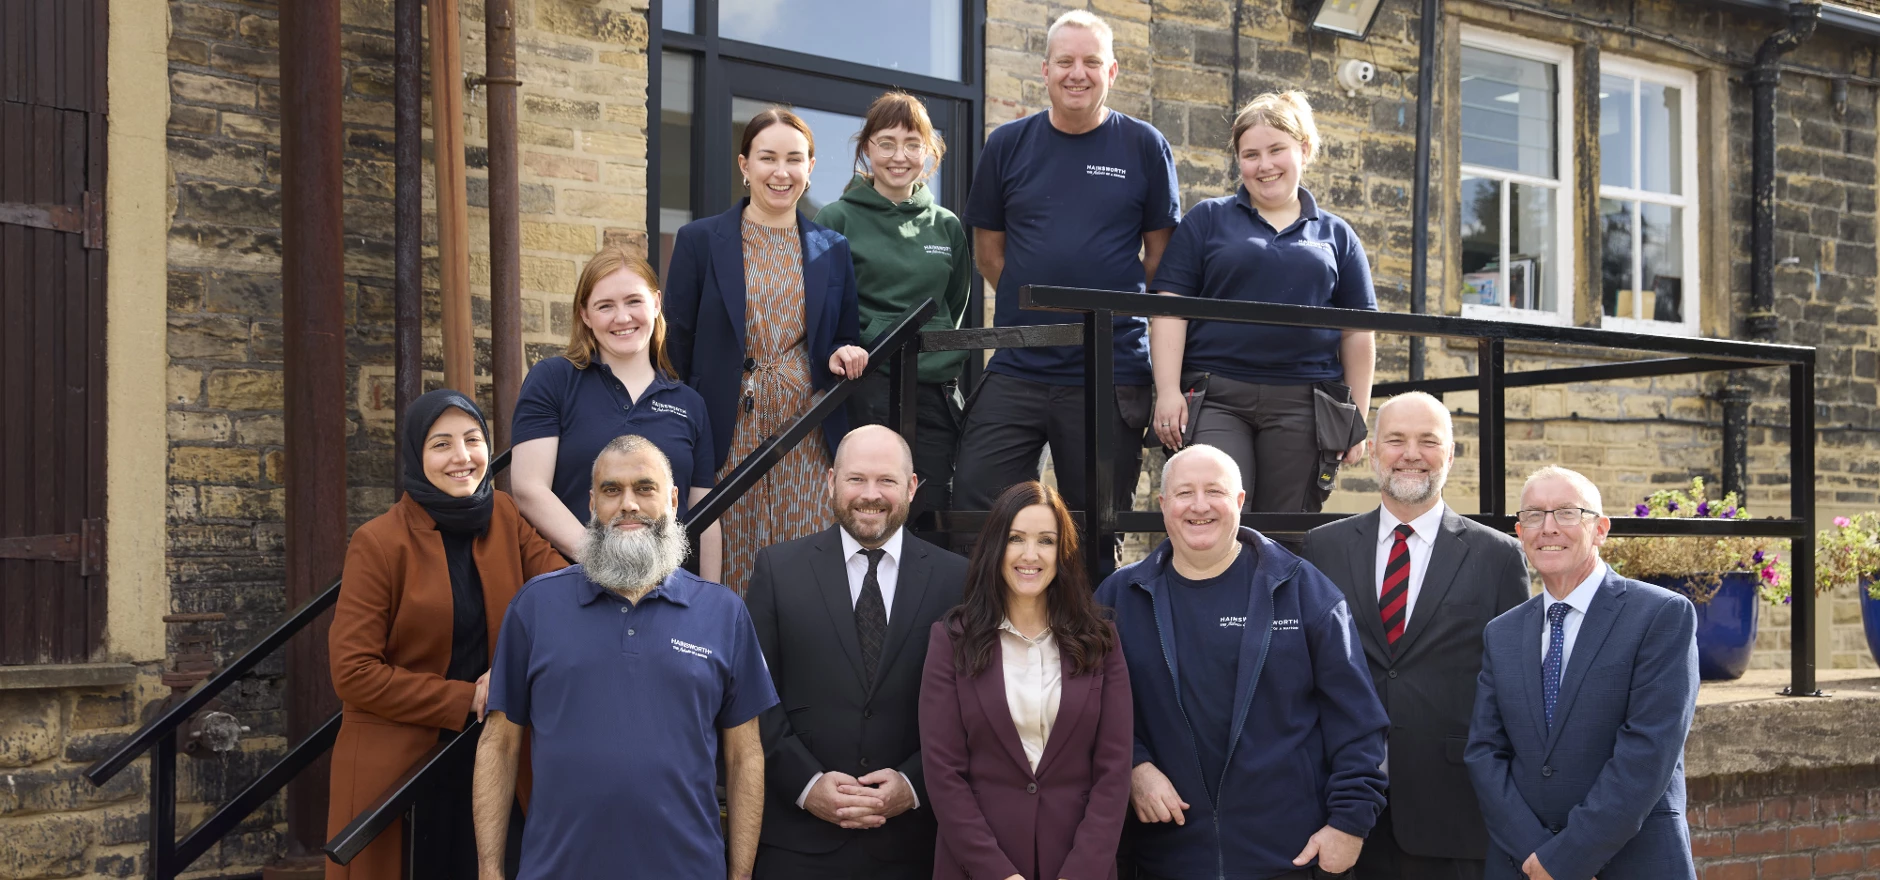 Some of the AW Hainsworth team.jpg